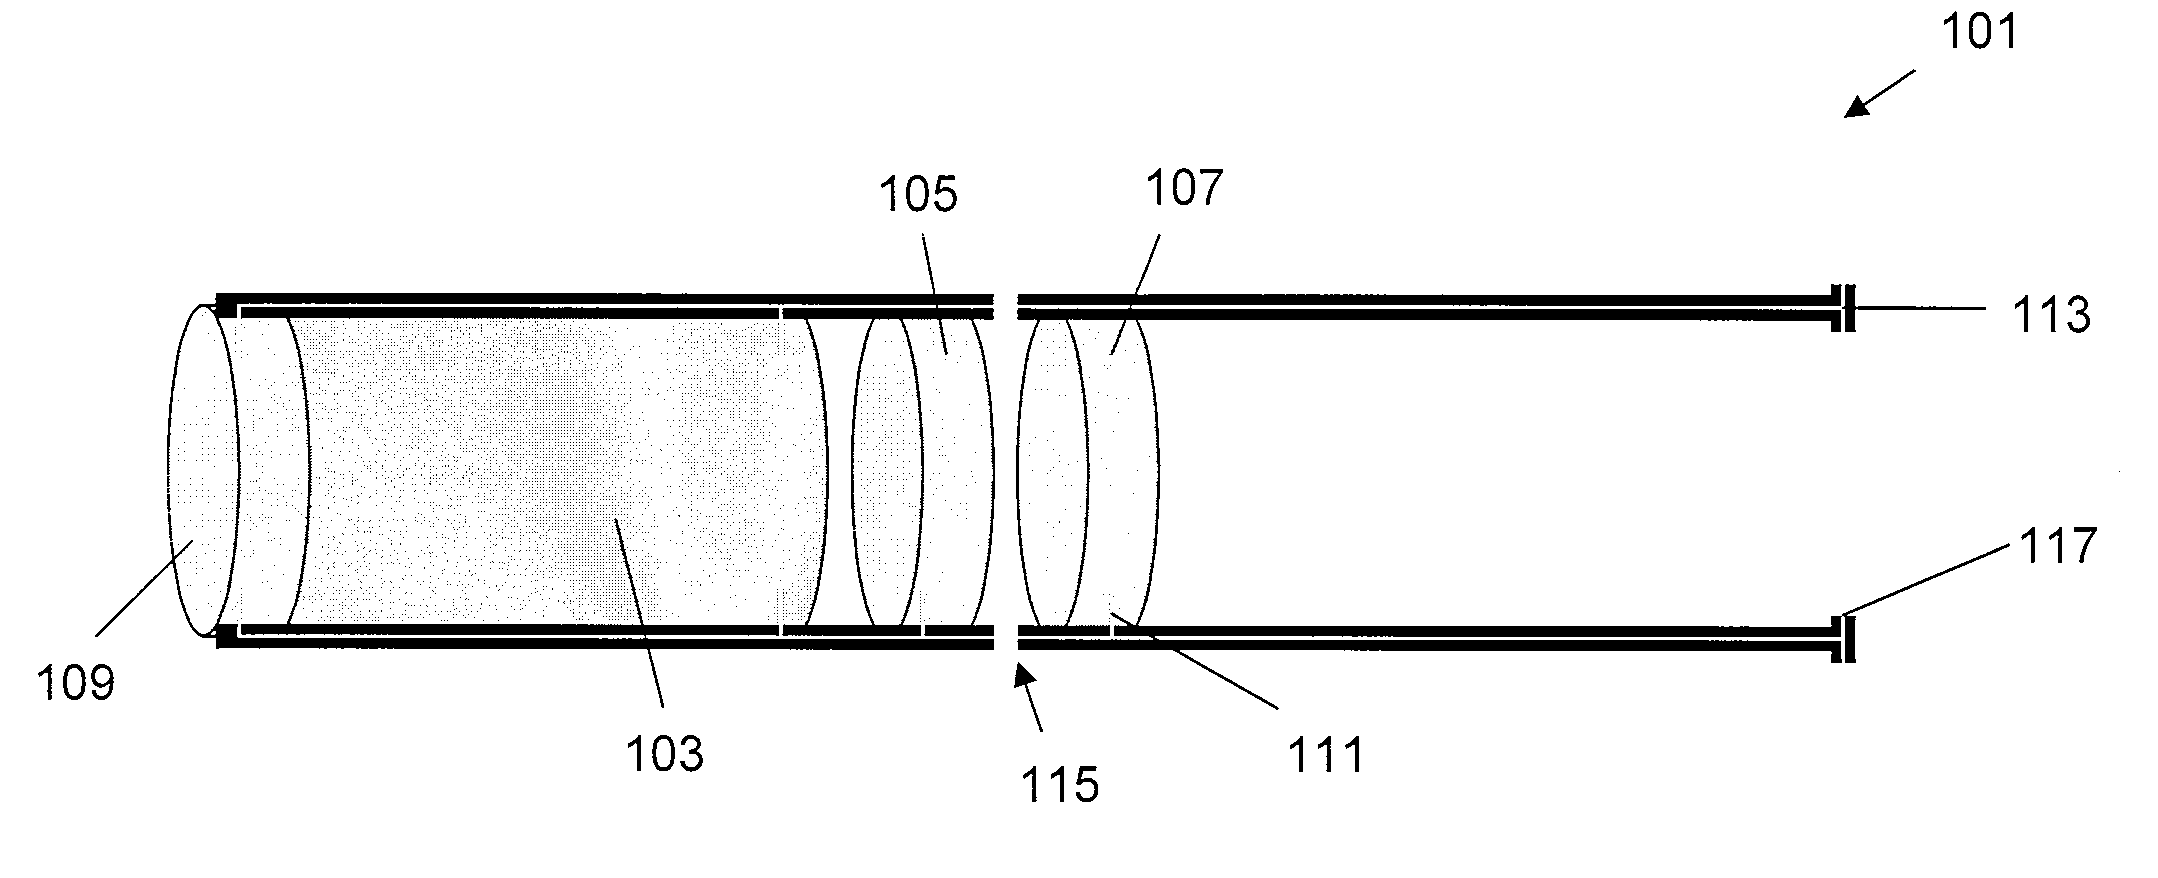 Electrically heated smoking system having a liquid storage portion